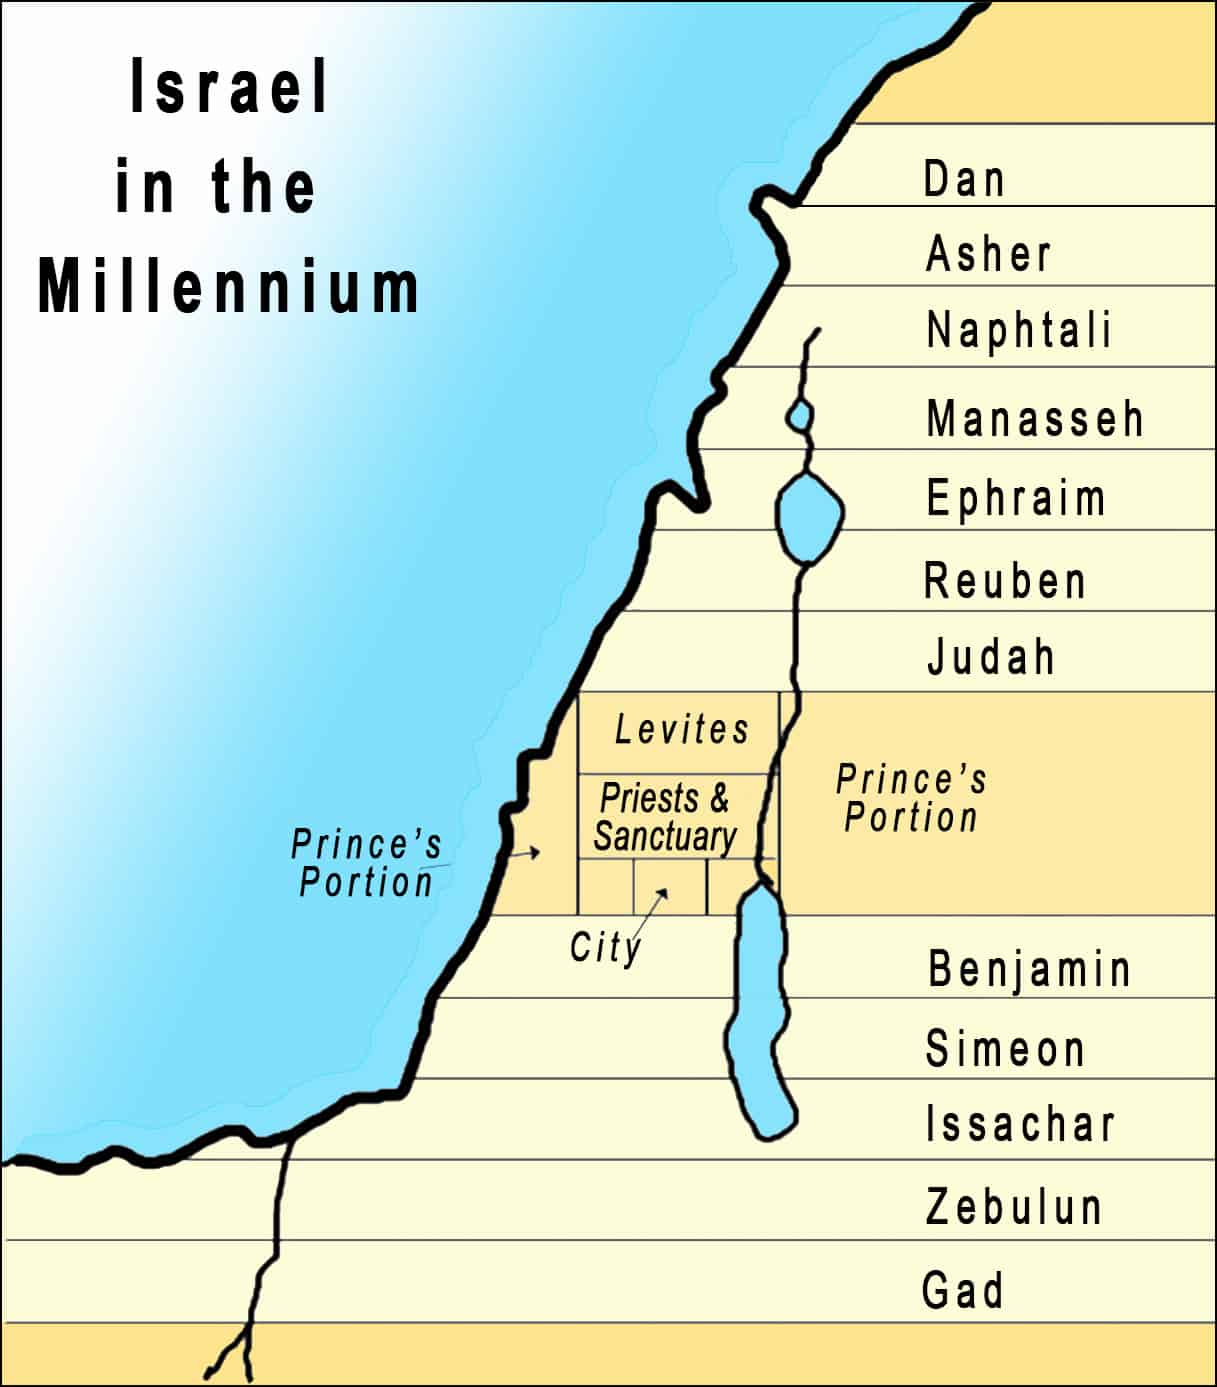 DIVISION OF THE LAND IN THE KINGDOM